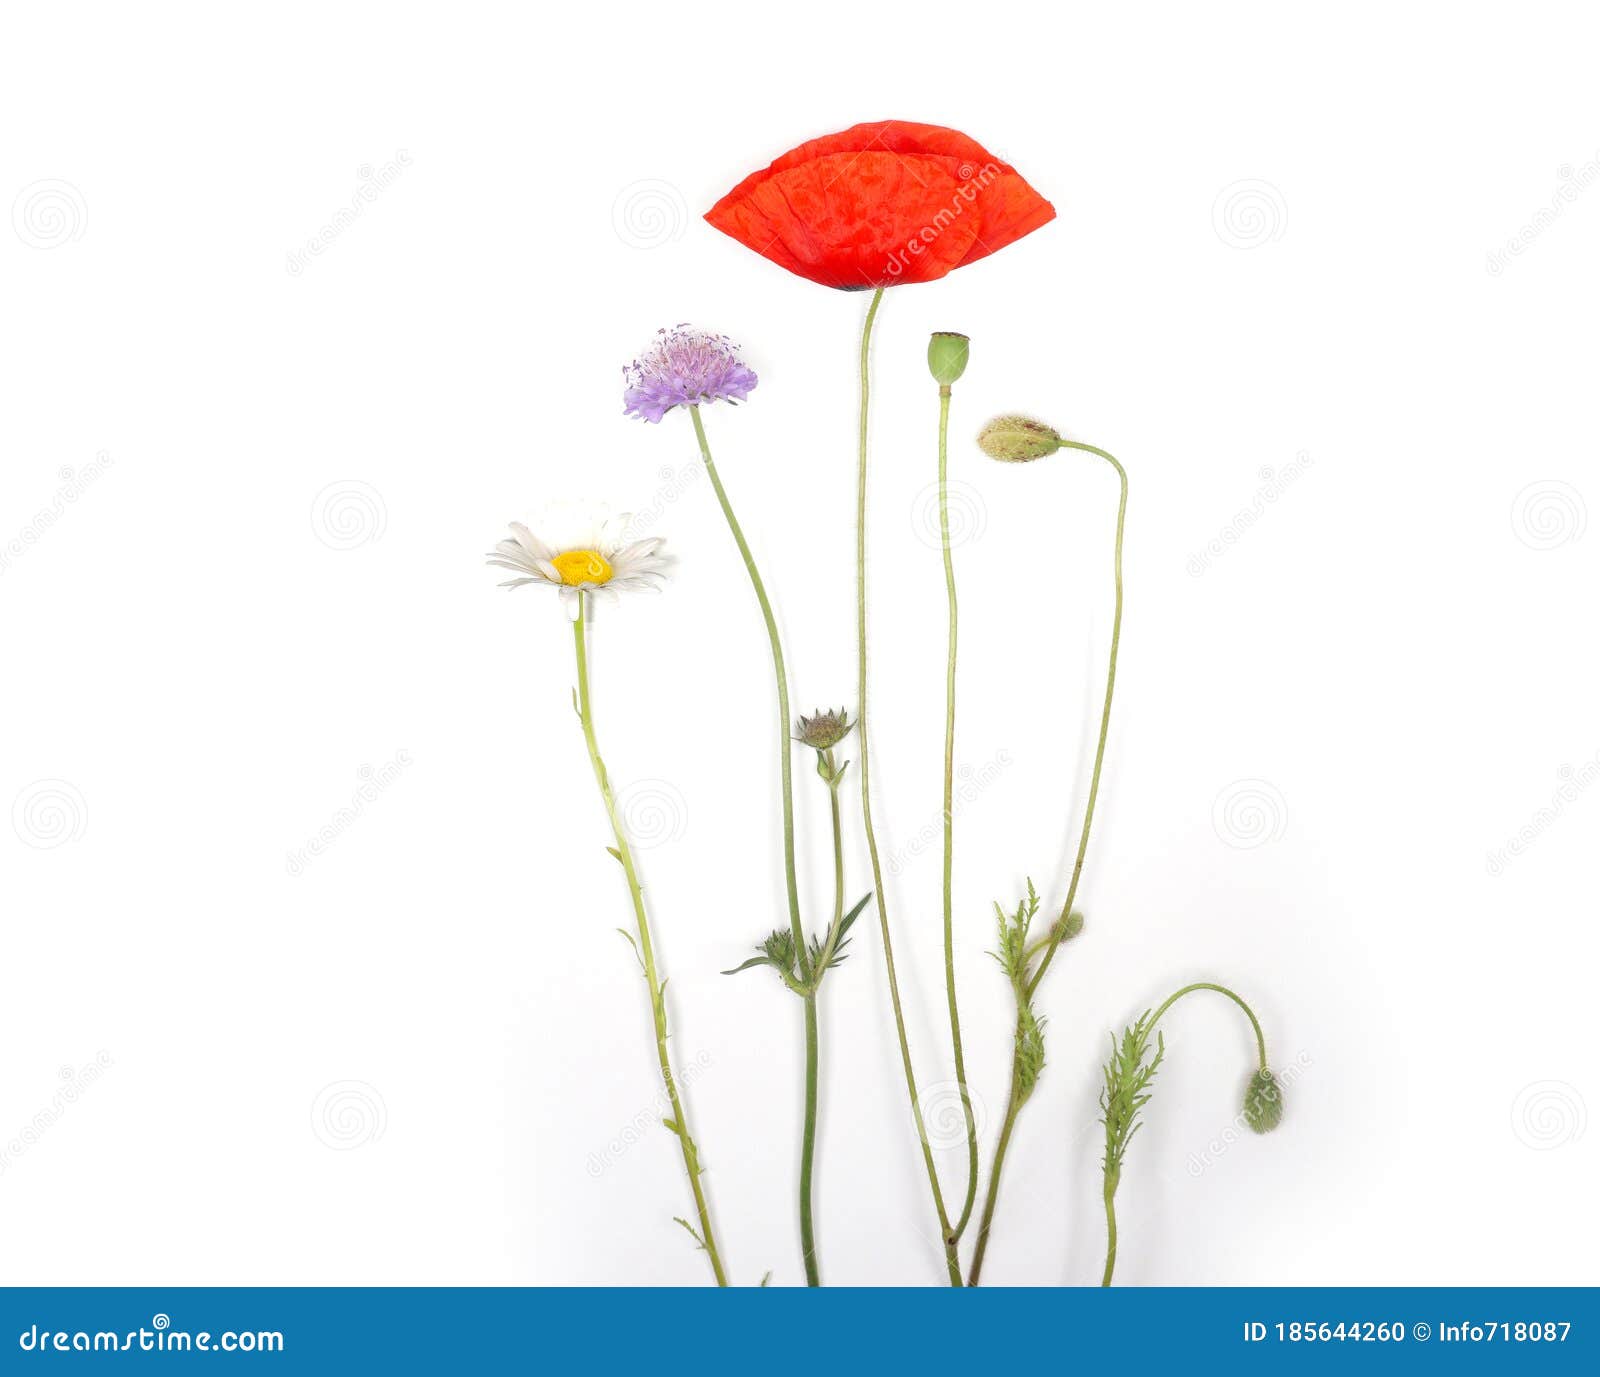 Single Wild Flowers Isolated on White Background, Beautiful Simple Field  Flowers with Copy Space for Your Own Text. Nice for Greet Stock Photo -  Image of garden, fresh: 185644260